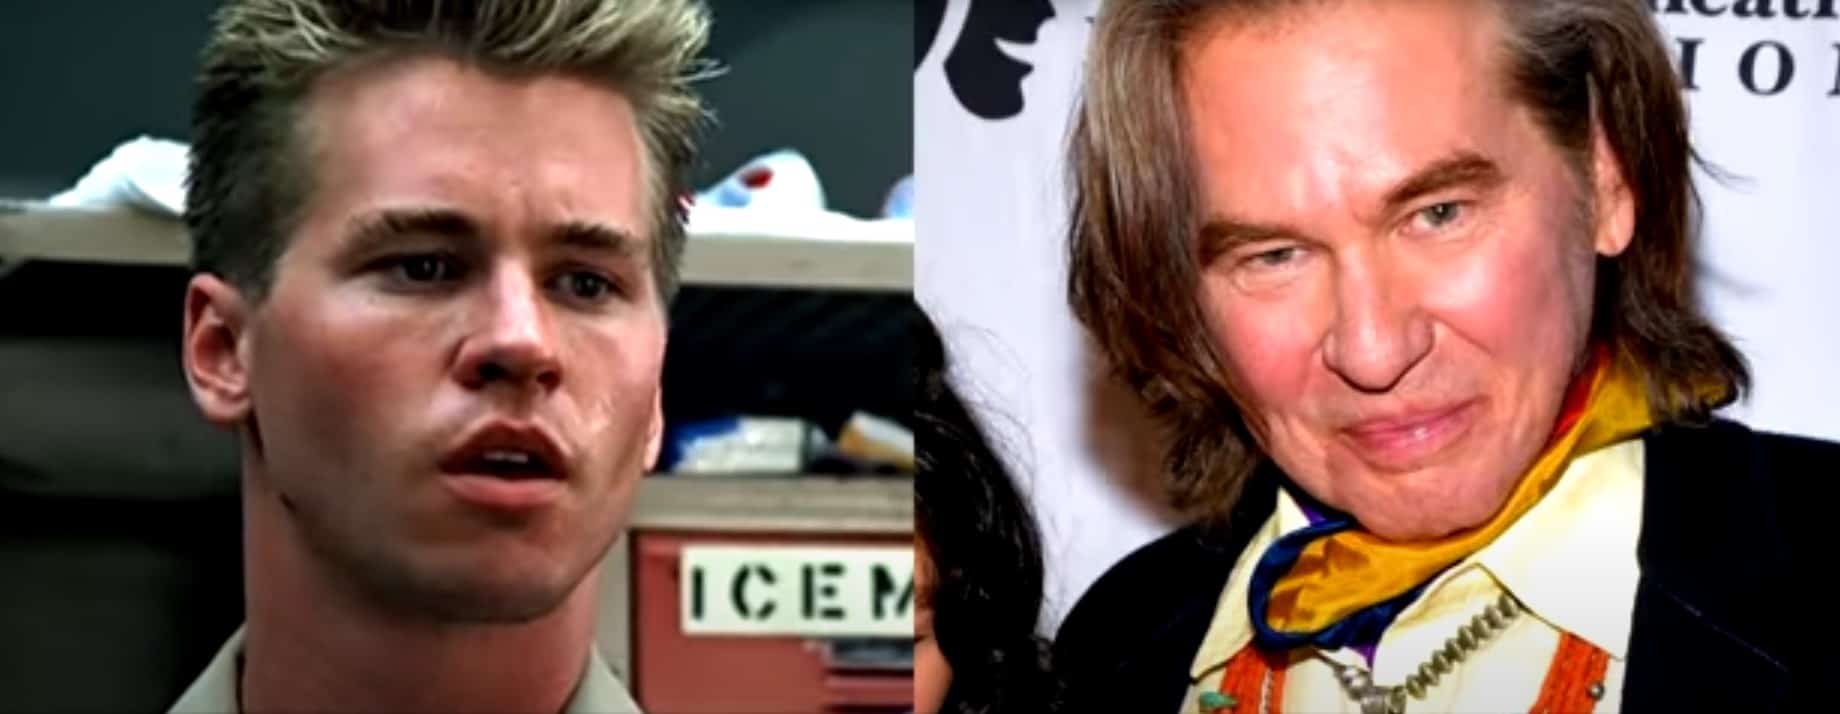 top gun actors and actresses then and now